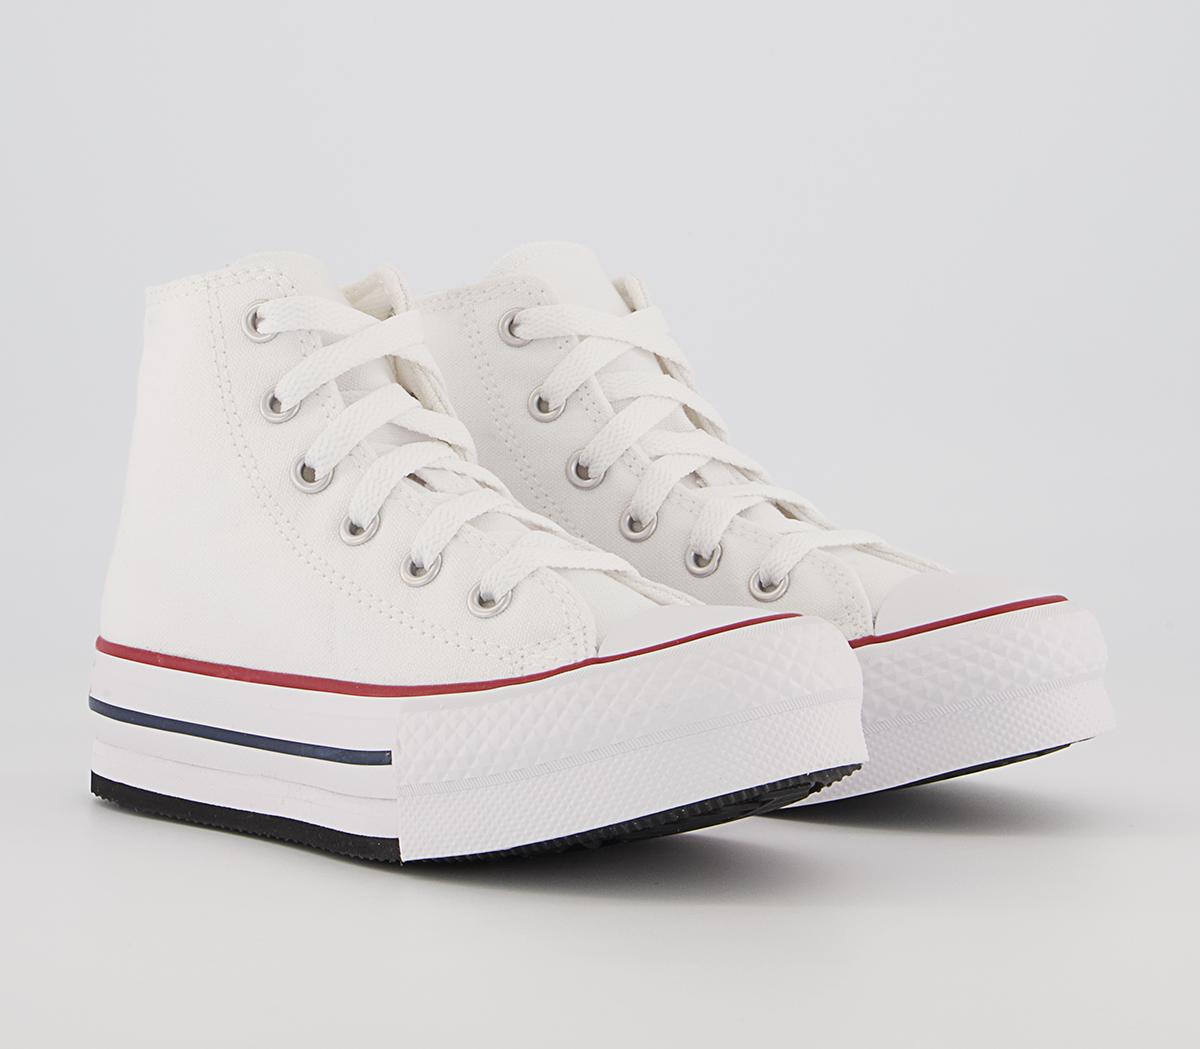 Converse Kids All Star Eva Lift Hi Trainers White Black Synthetic, 13 Youth